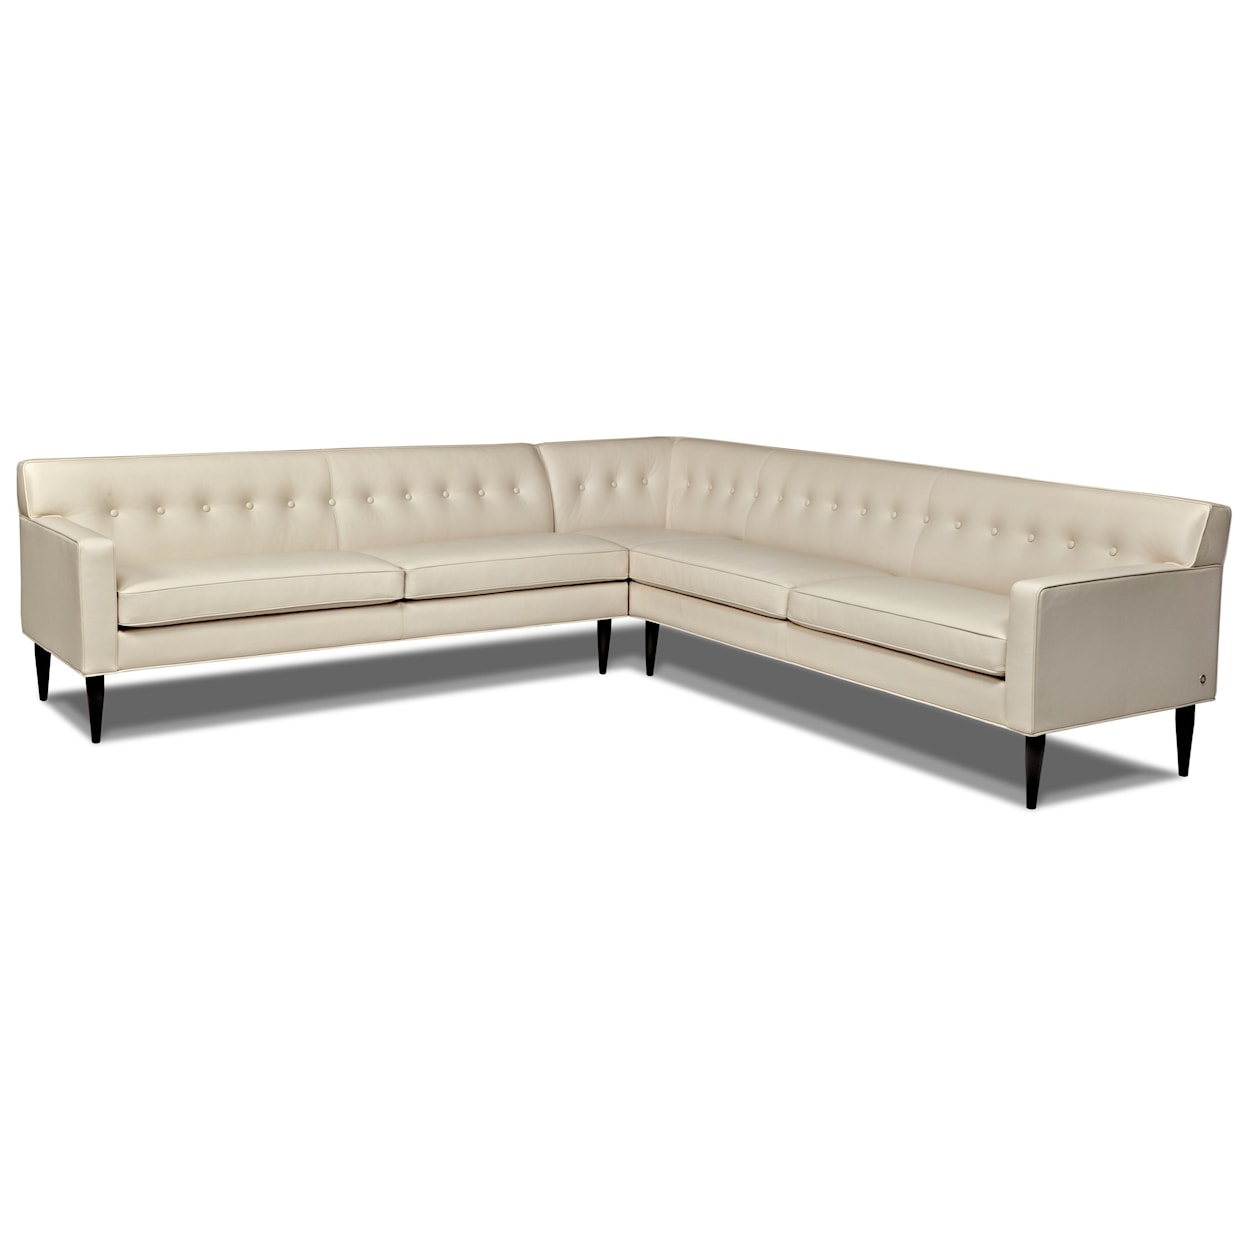 American Leather Quincy 4-Seat Sectional Sofa